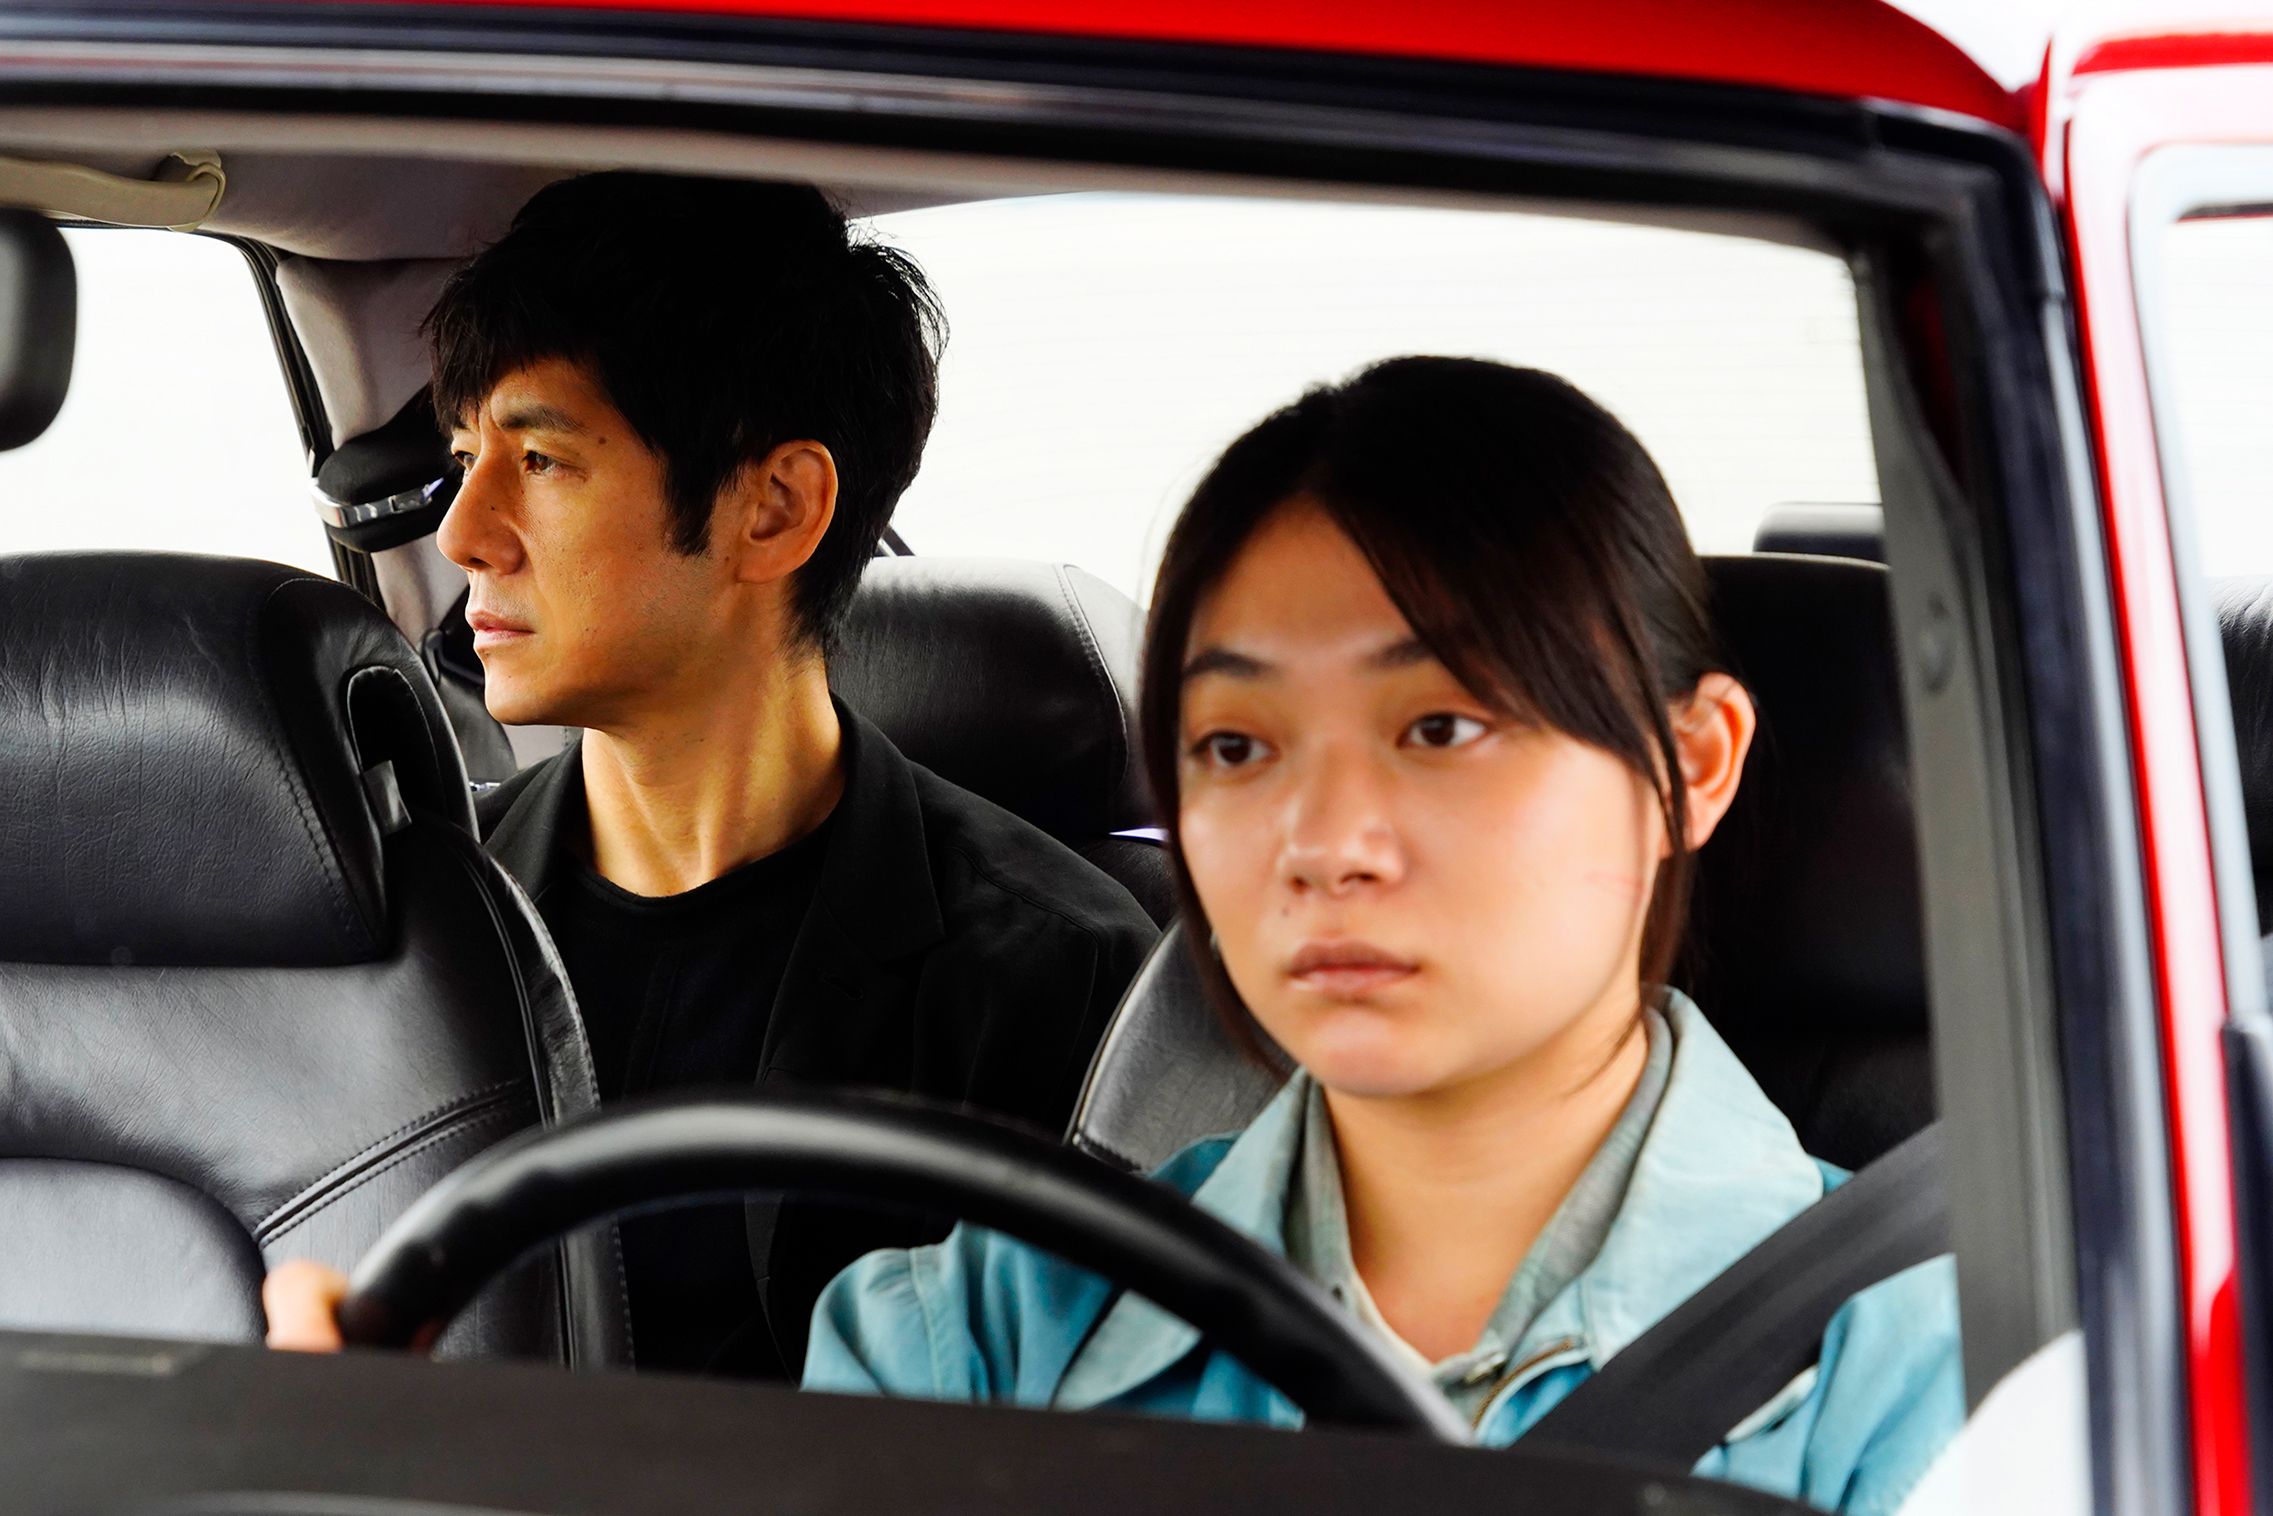 How to Watch 'Drive My Car' Online - Where to Stream 'Drive My Car' 2022